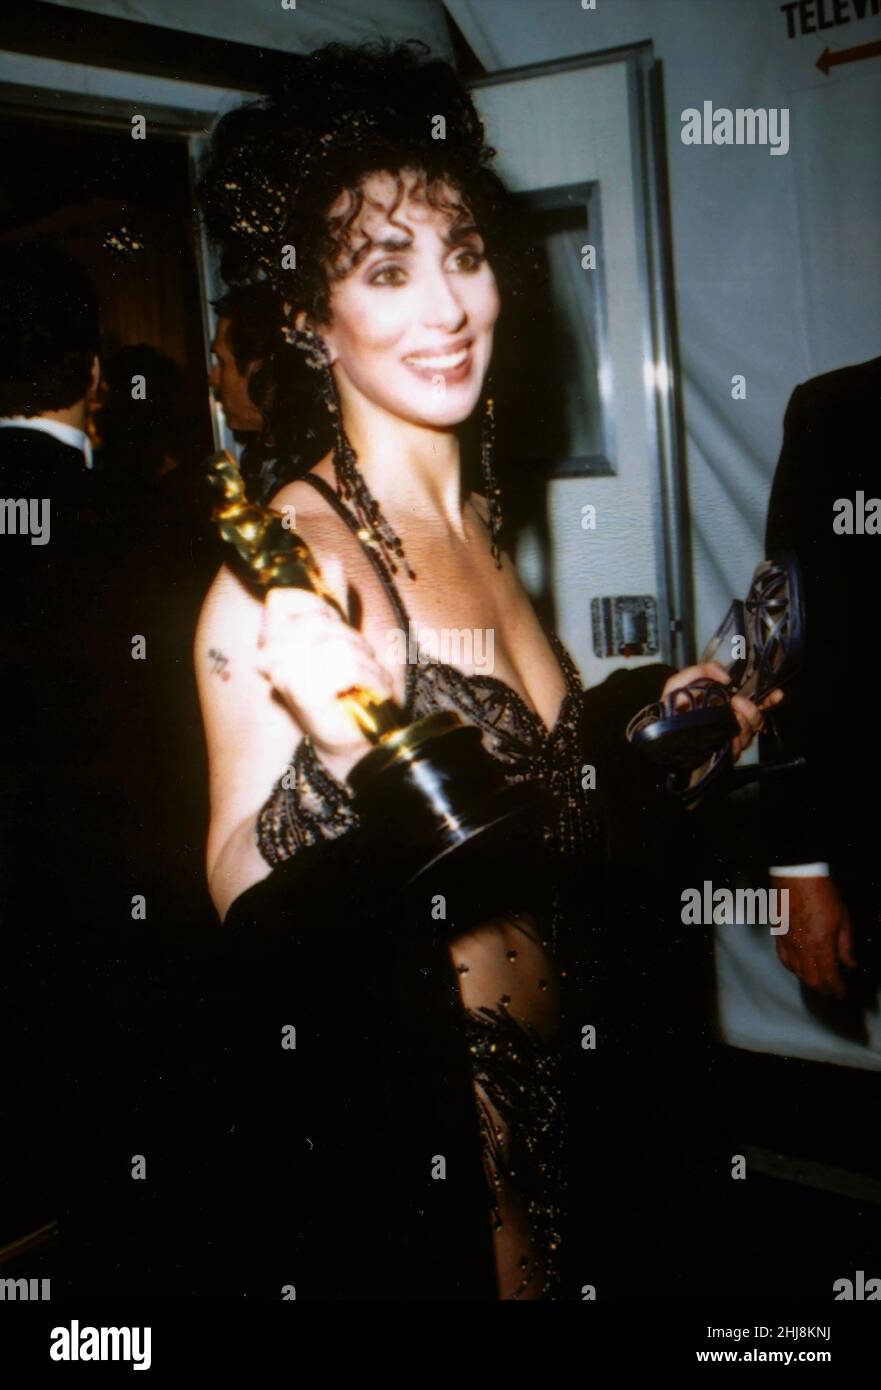 Cher at the Academy Awards for Best Actress for Moonstruck, 1988. Credit: Ron Wolfson / Rock Negatives / MediaPunch Stock Photo